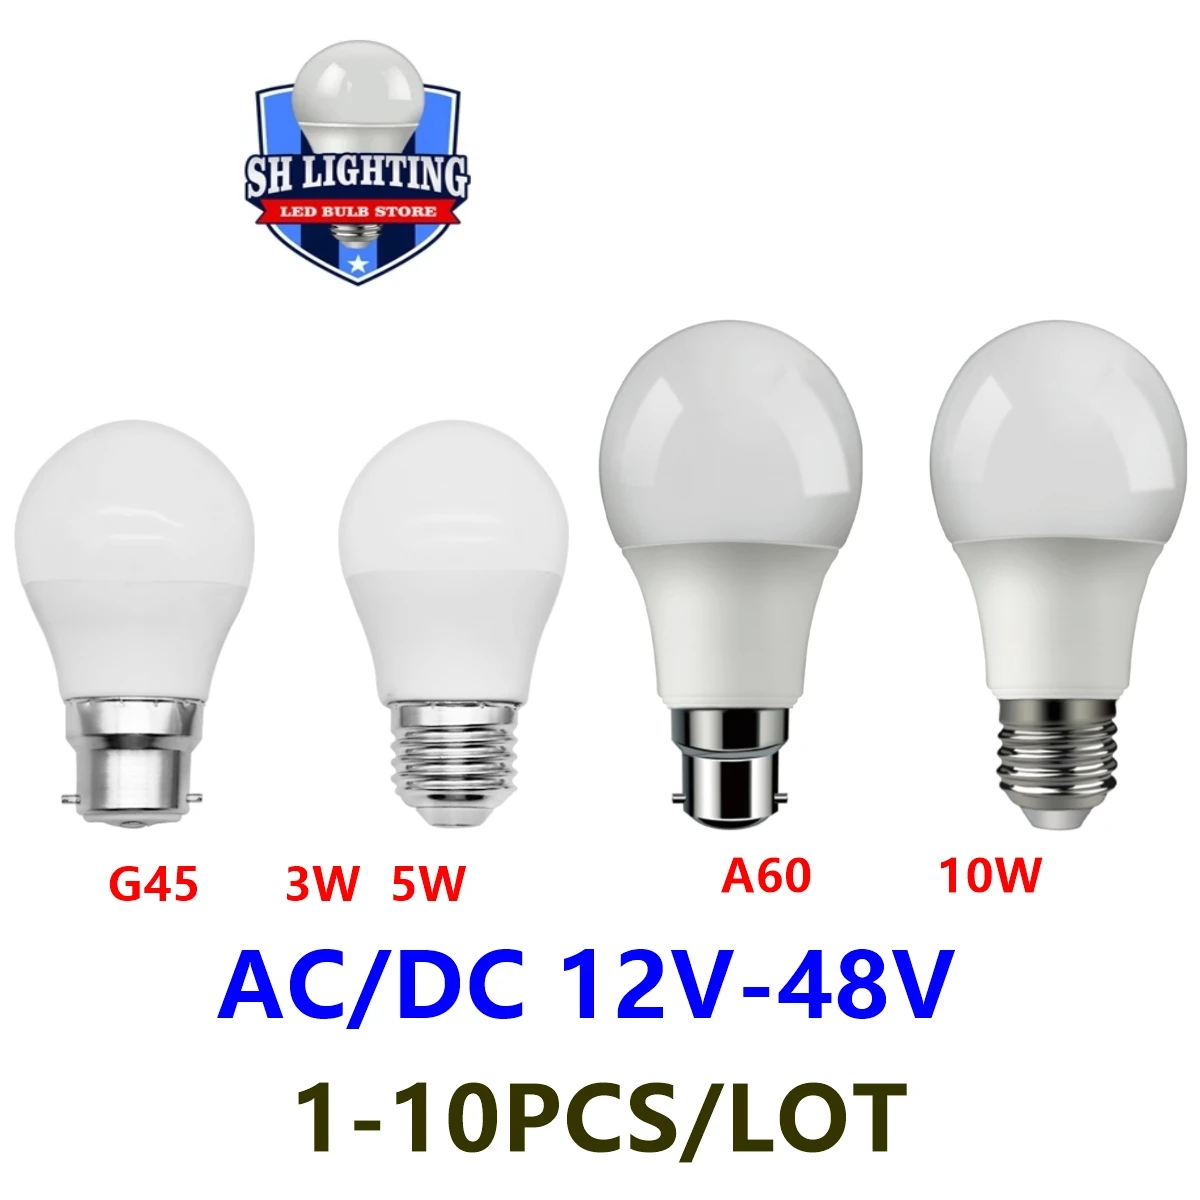 1-10pcs LED Low voltage AC/DC12V-48V bulb 3W 5W 10W super bright without strobe E27 B22 suitable for solar battery bulbs